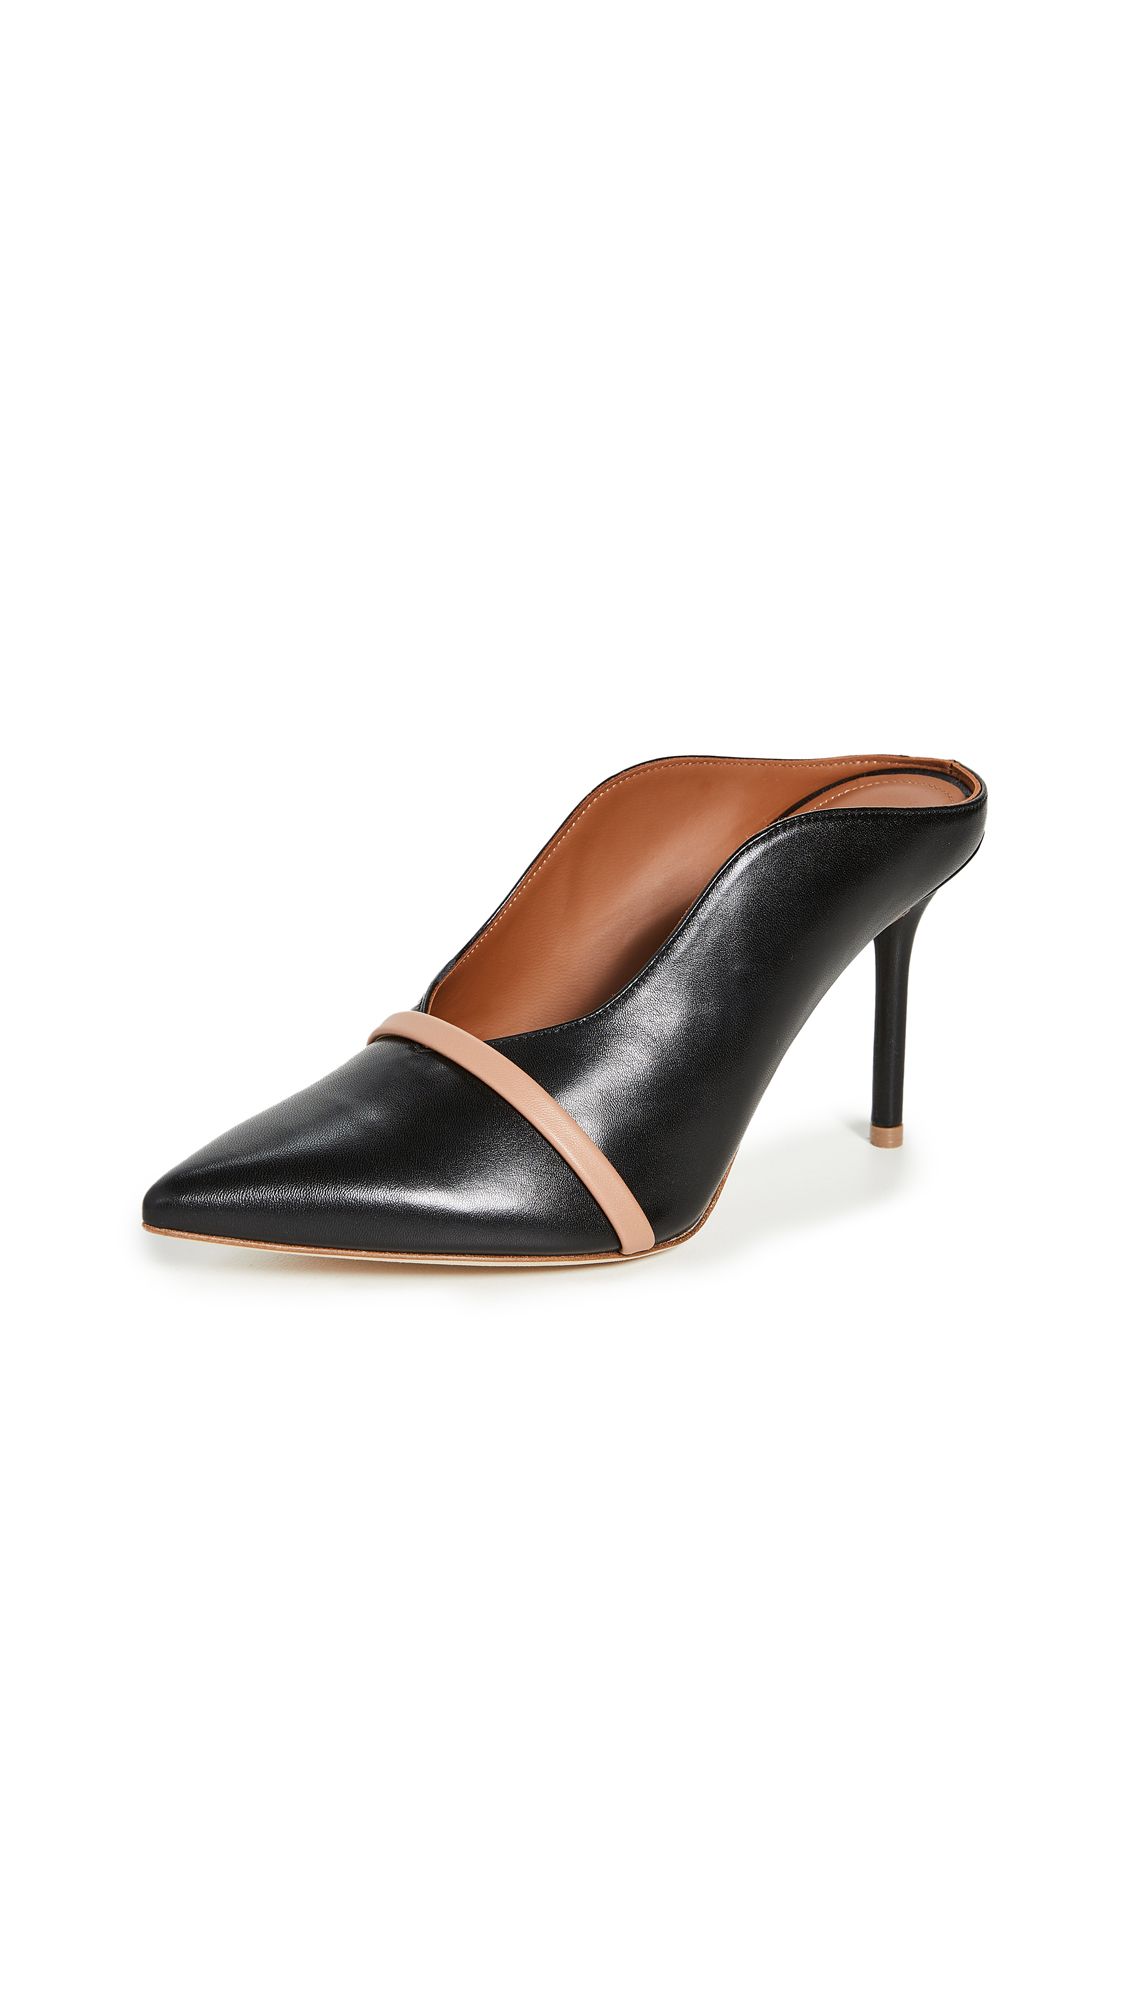 Malone Souliers 85mm Constance Mules | Shopbop